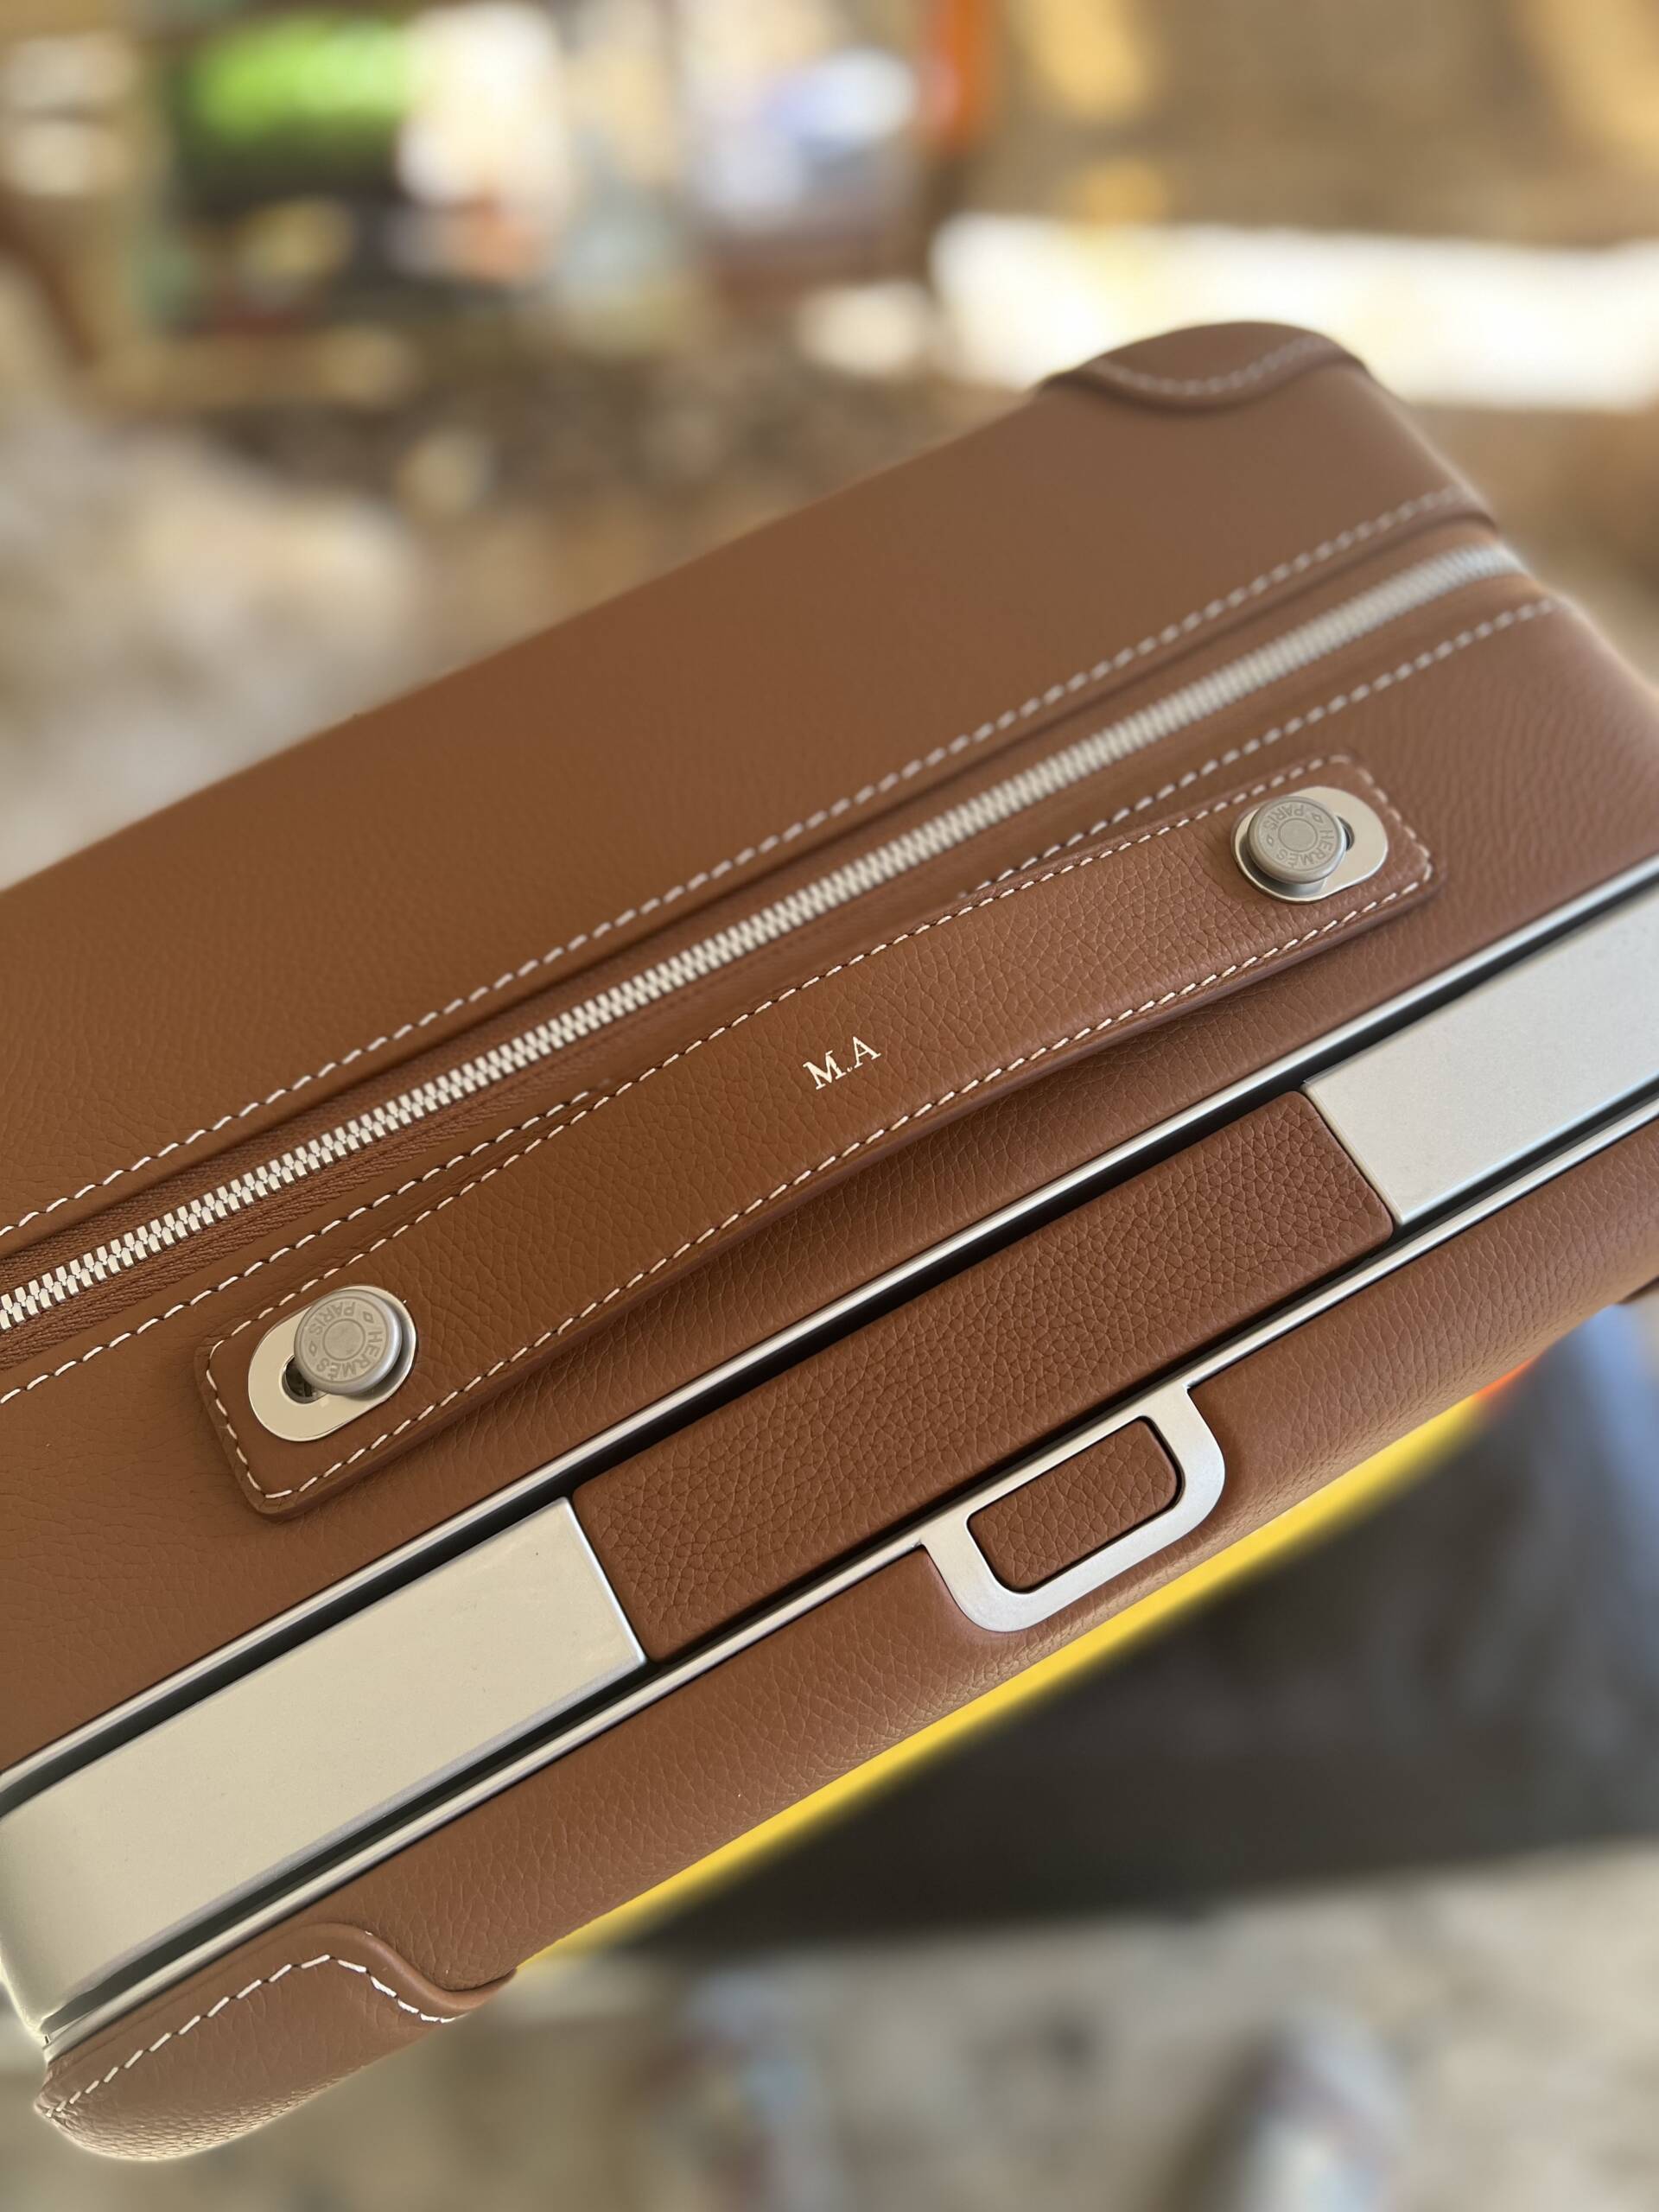 Bringing Home the Hermès R.M.S Luggage: Reveal and Extensive